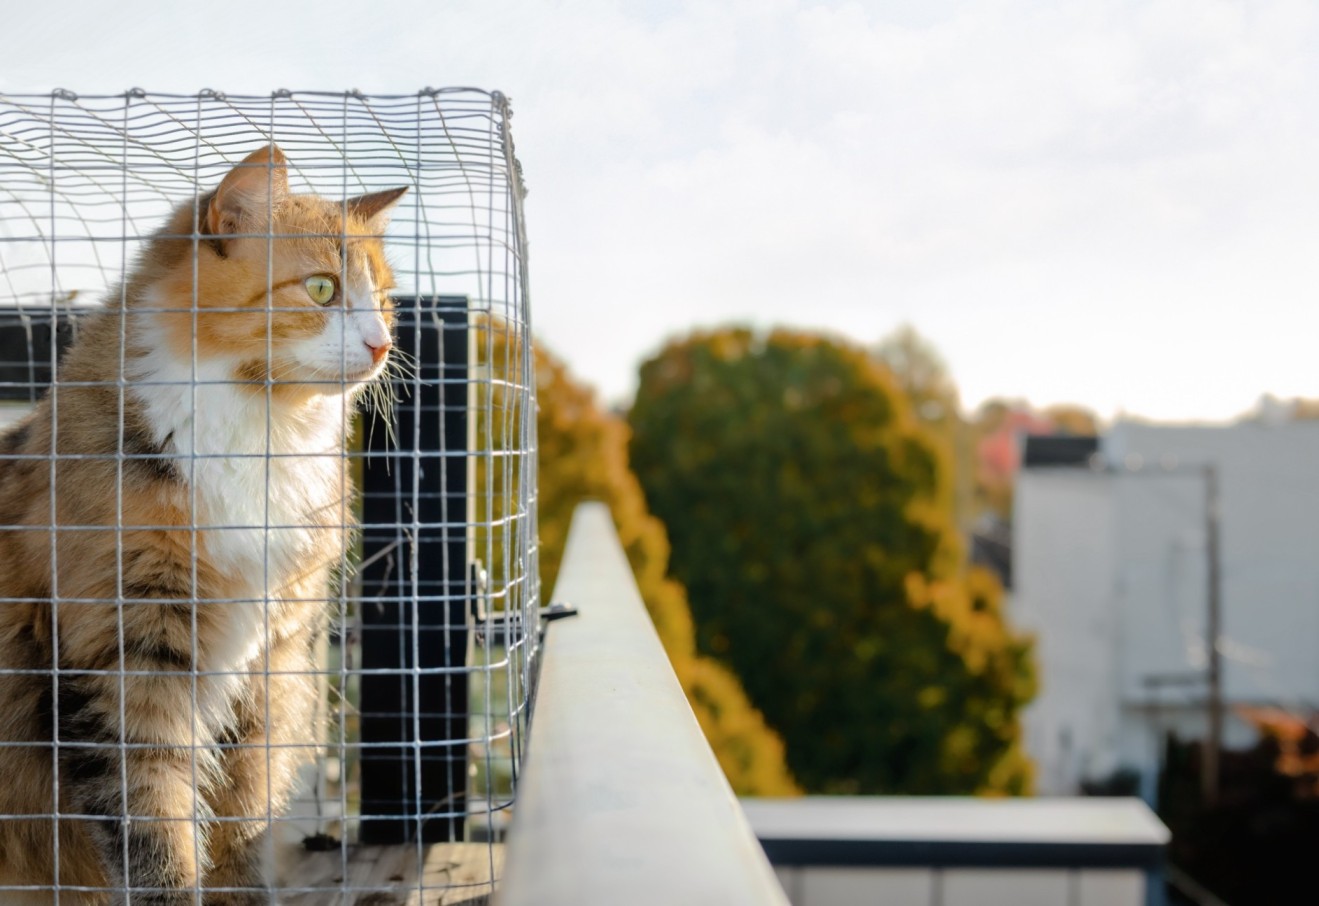 A cat sitting in a mesh enclosure on a balcony